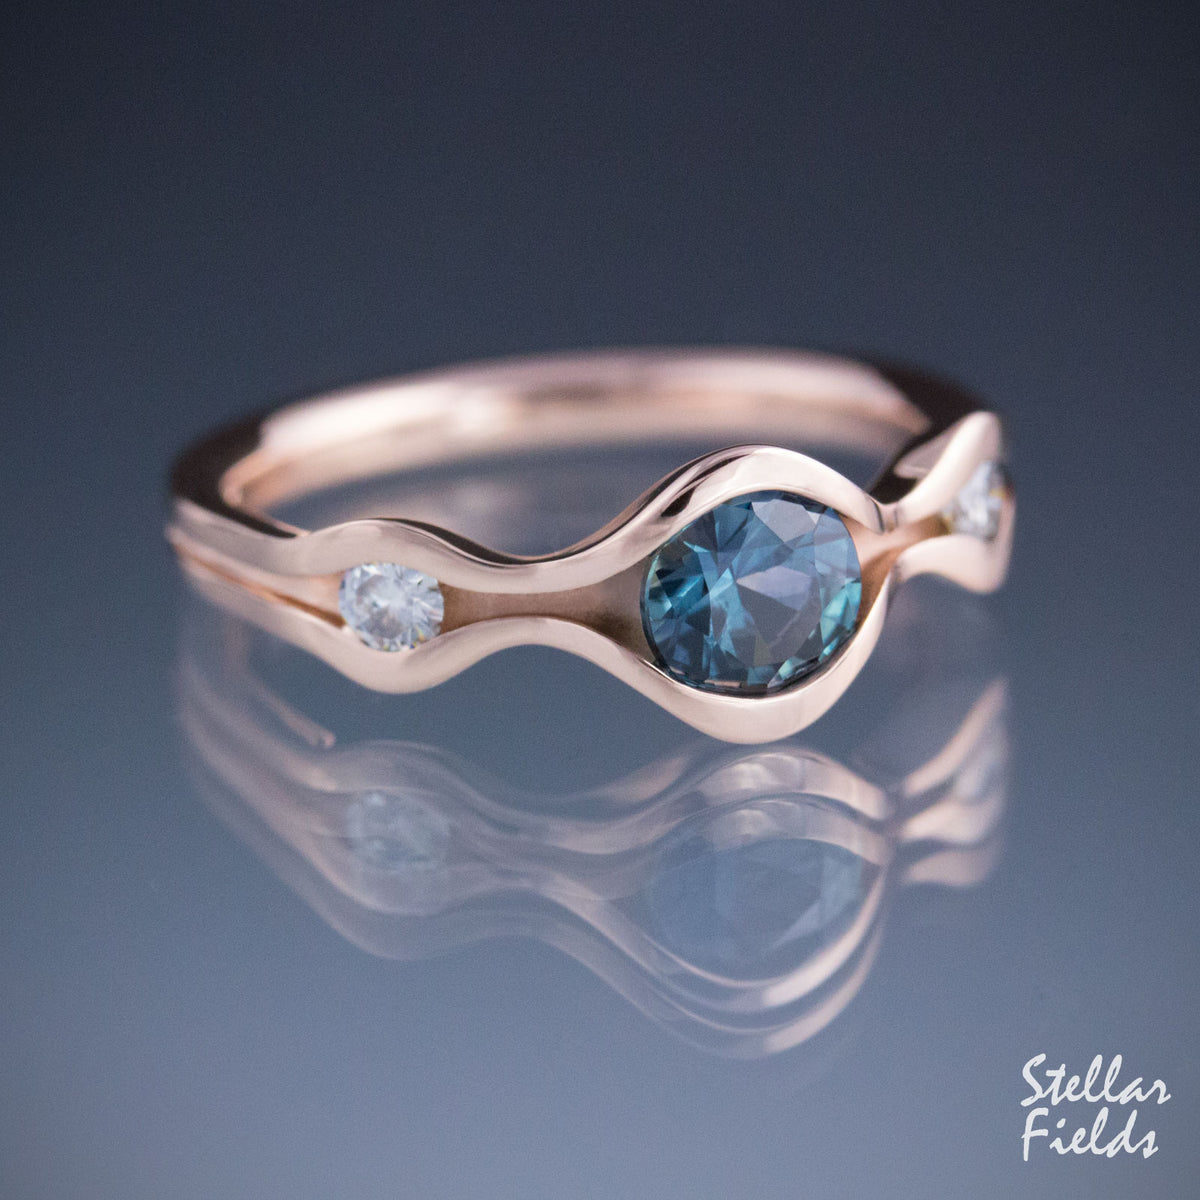 Teal Sapphire Wave Ring Three Stone Engagement Ring Rose Gold Stellar Fields 